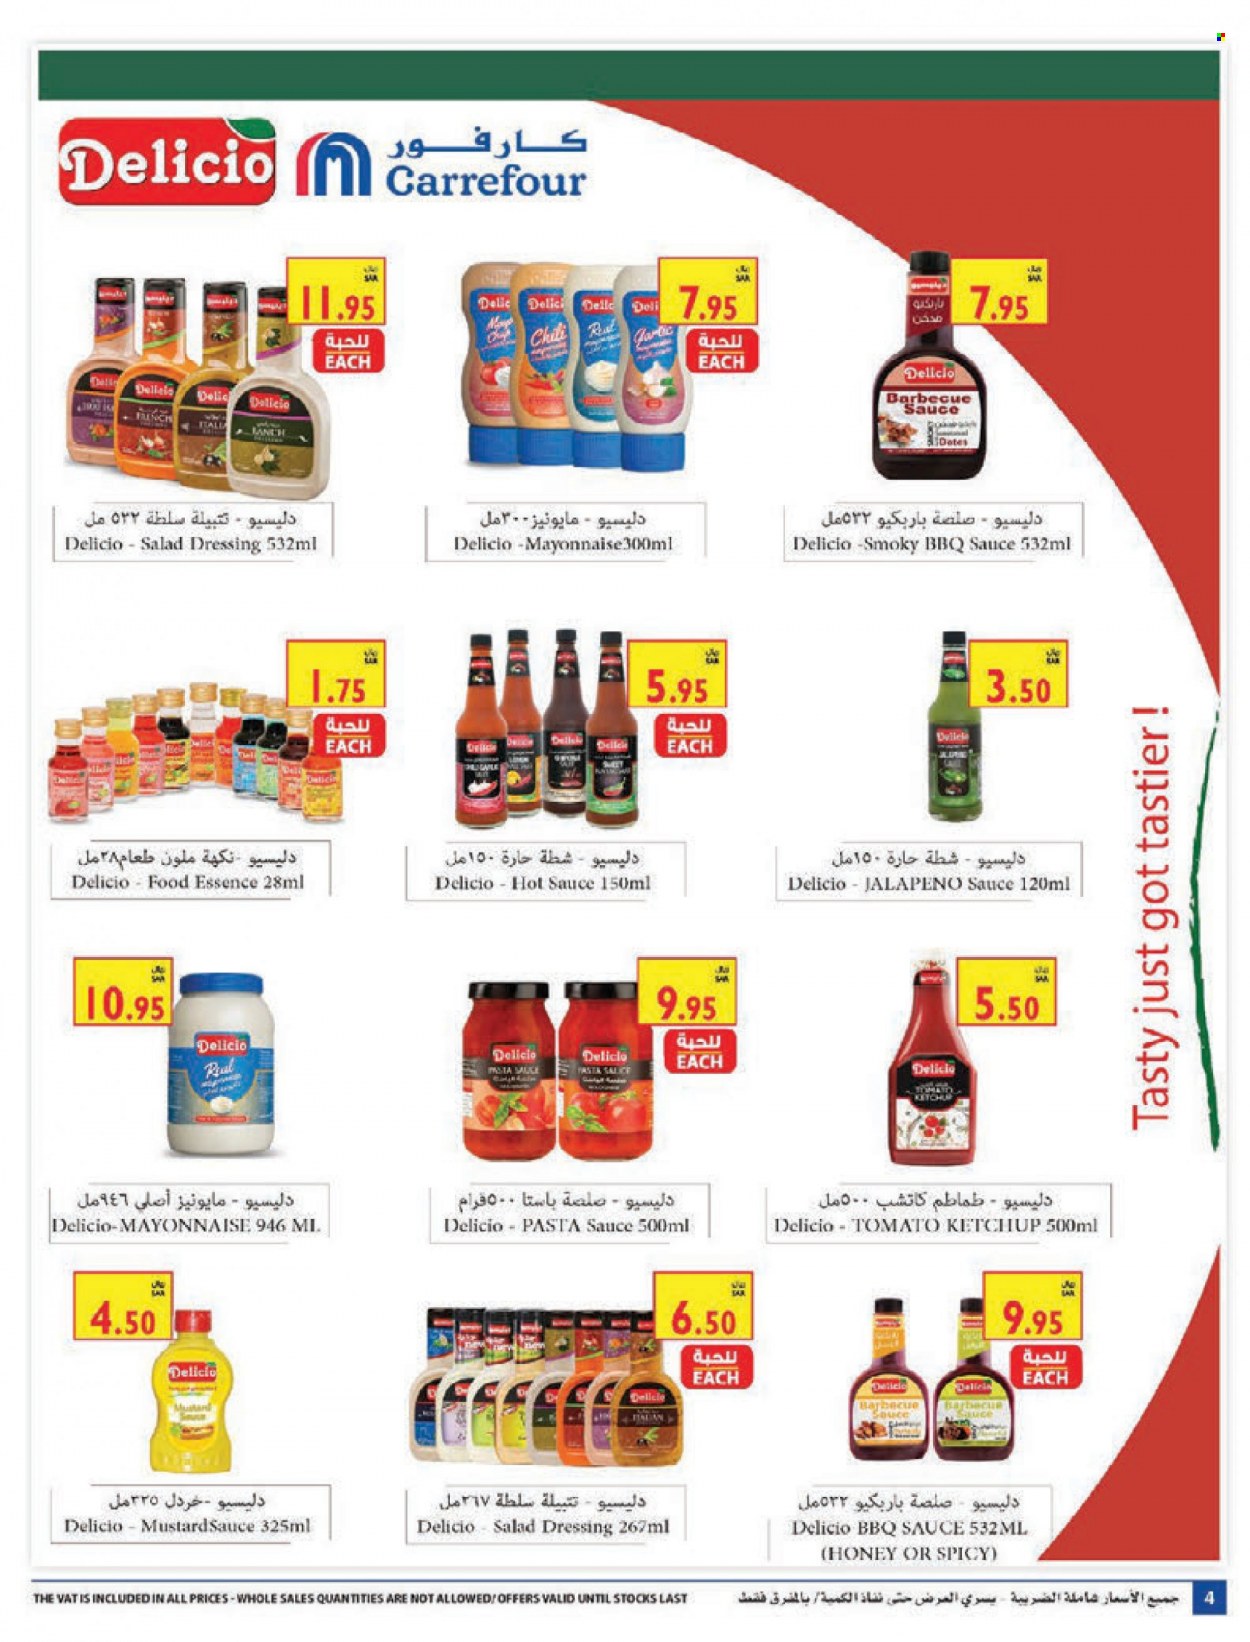 Carrefour flyer  - 10.27.2021 - 11.02.2021. Page 4.